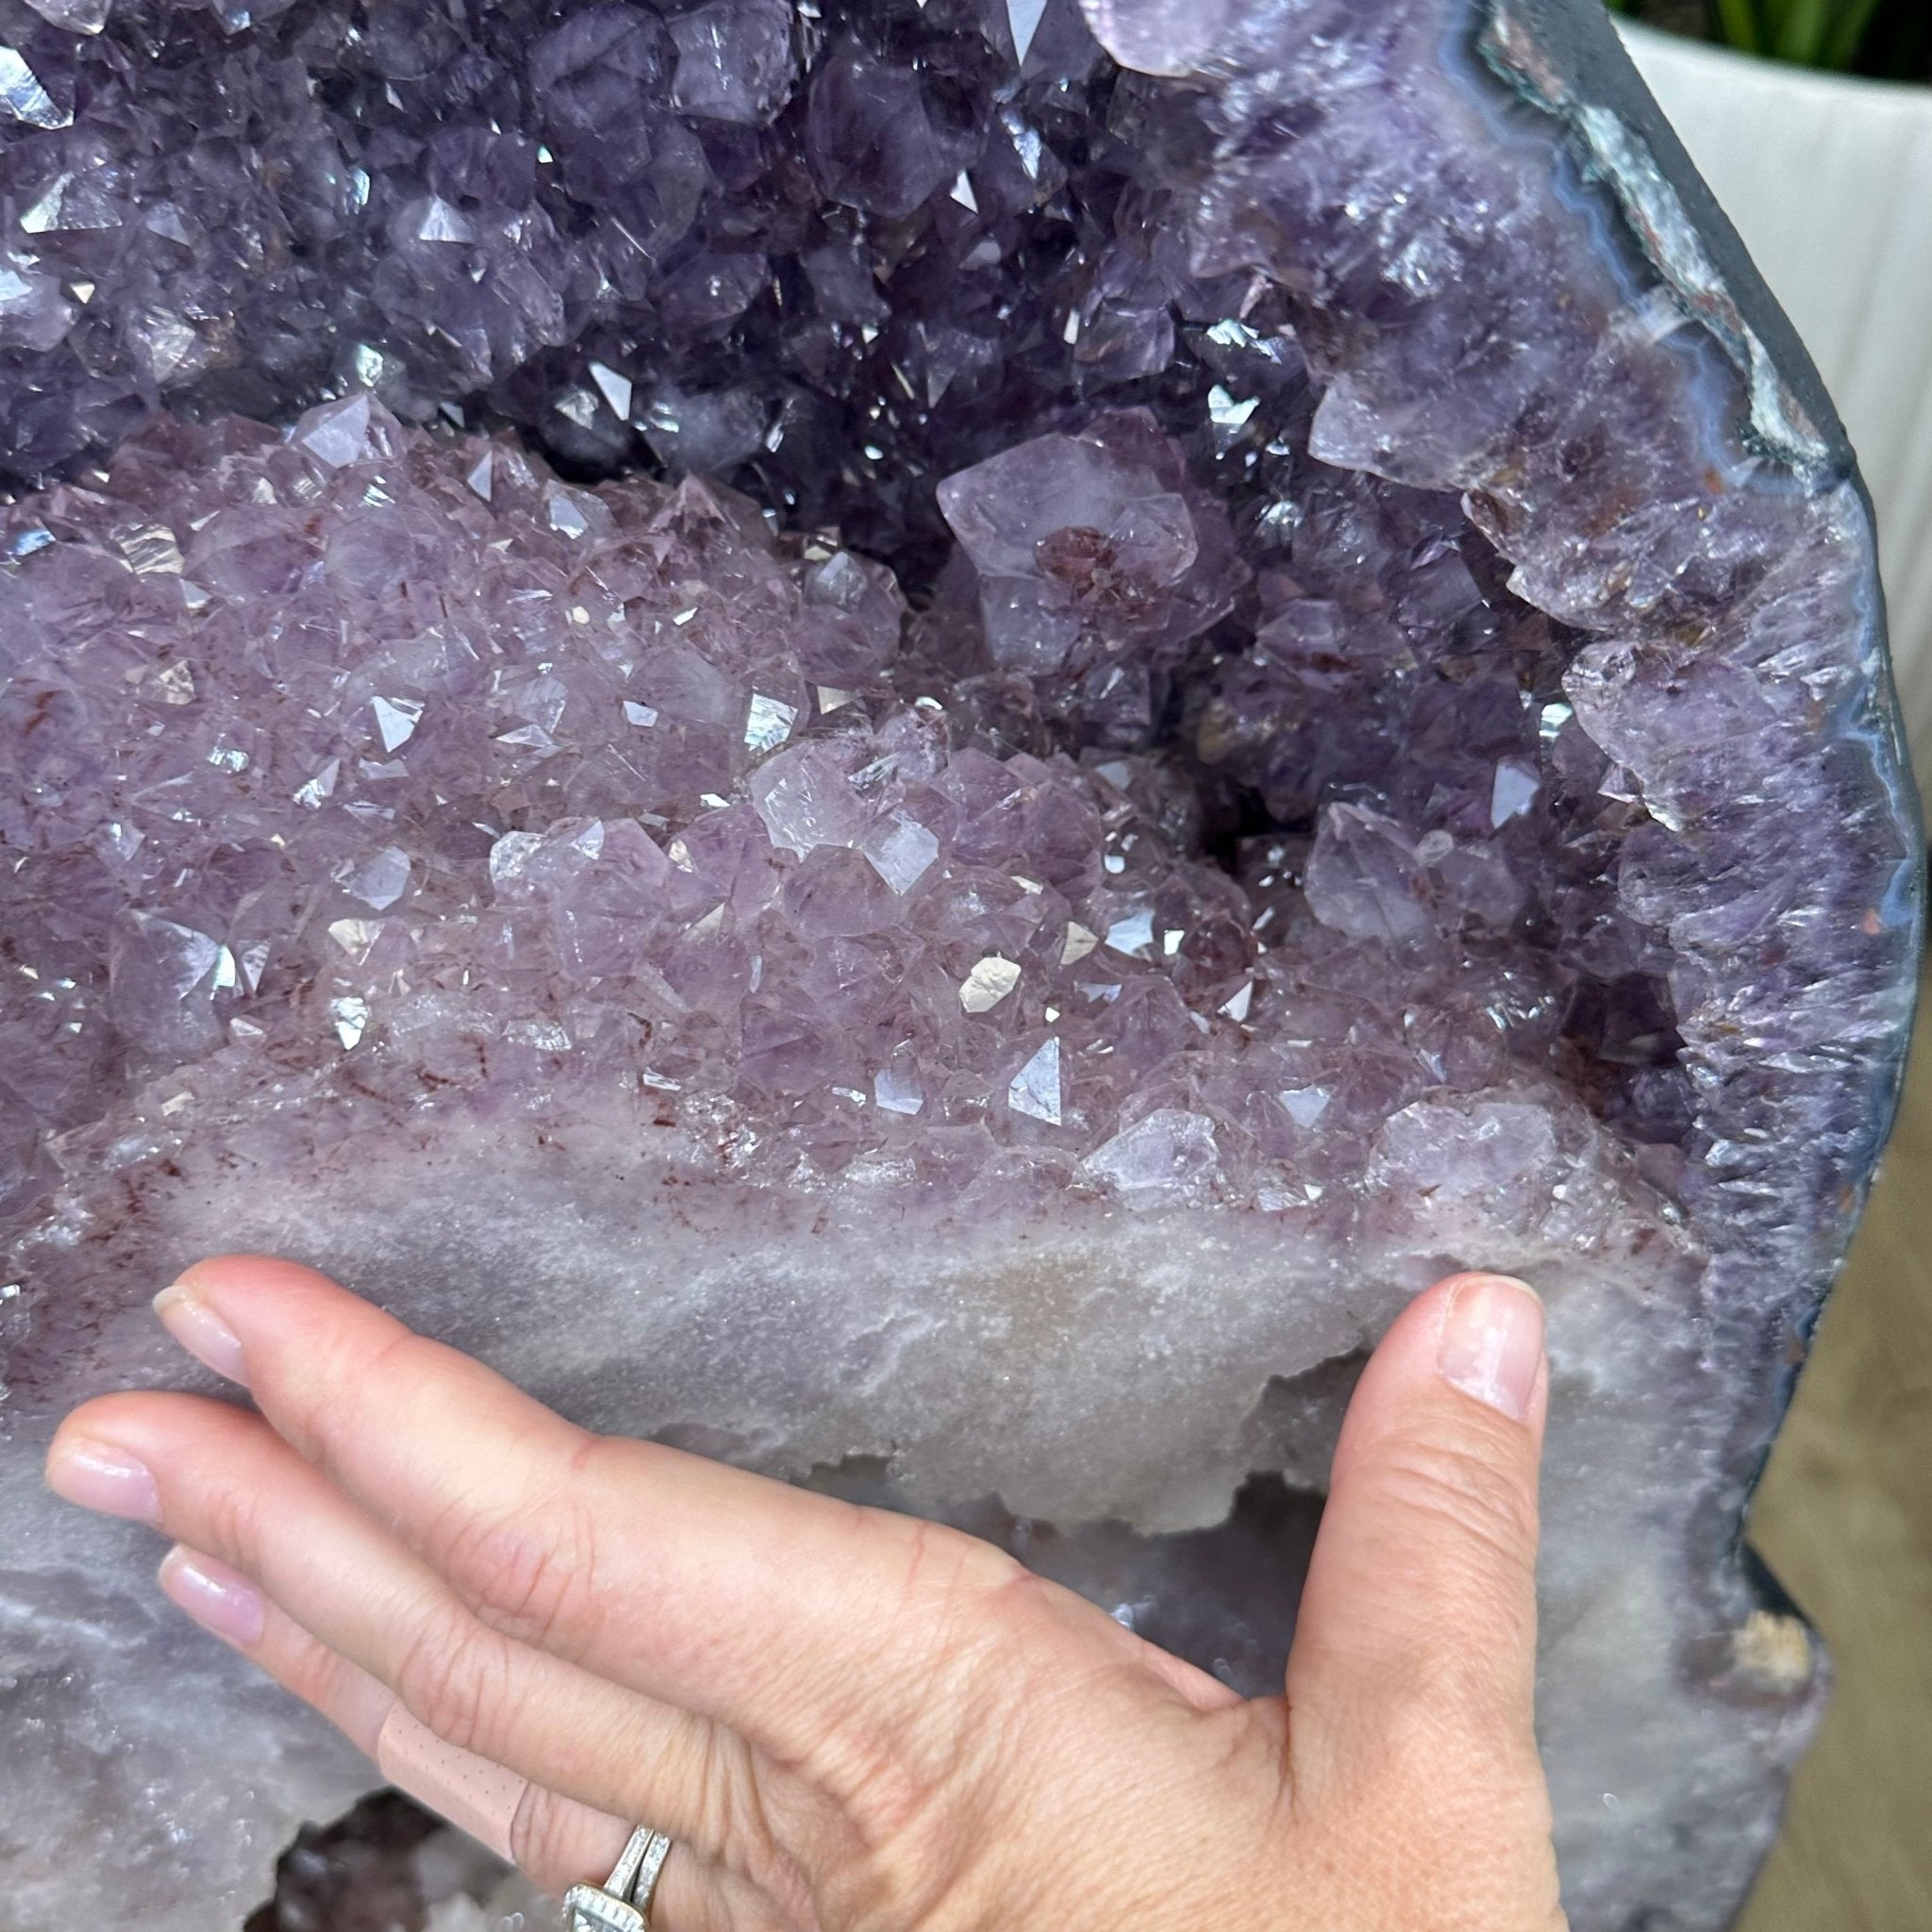 Extra Plus Quality Brazilian Amethyst Cathedral, 110.3 lbs & 35" Tall, Model #5601-1211 by Brazil Gems - Brazil GemsBrazil GemsExtra Plus Quality Brazilian Amethyst Cathedral, 110.3 lbs & 35" Tall, Model #5601-1211 by Brazil GemsCathedrals5601-1211